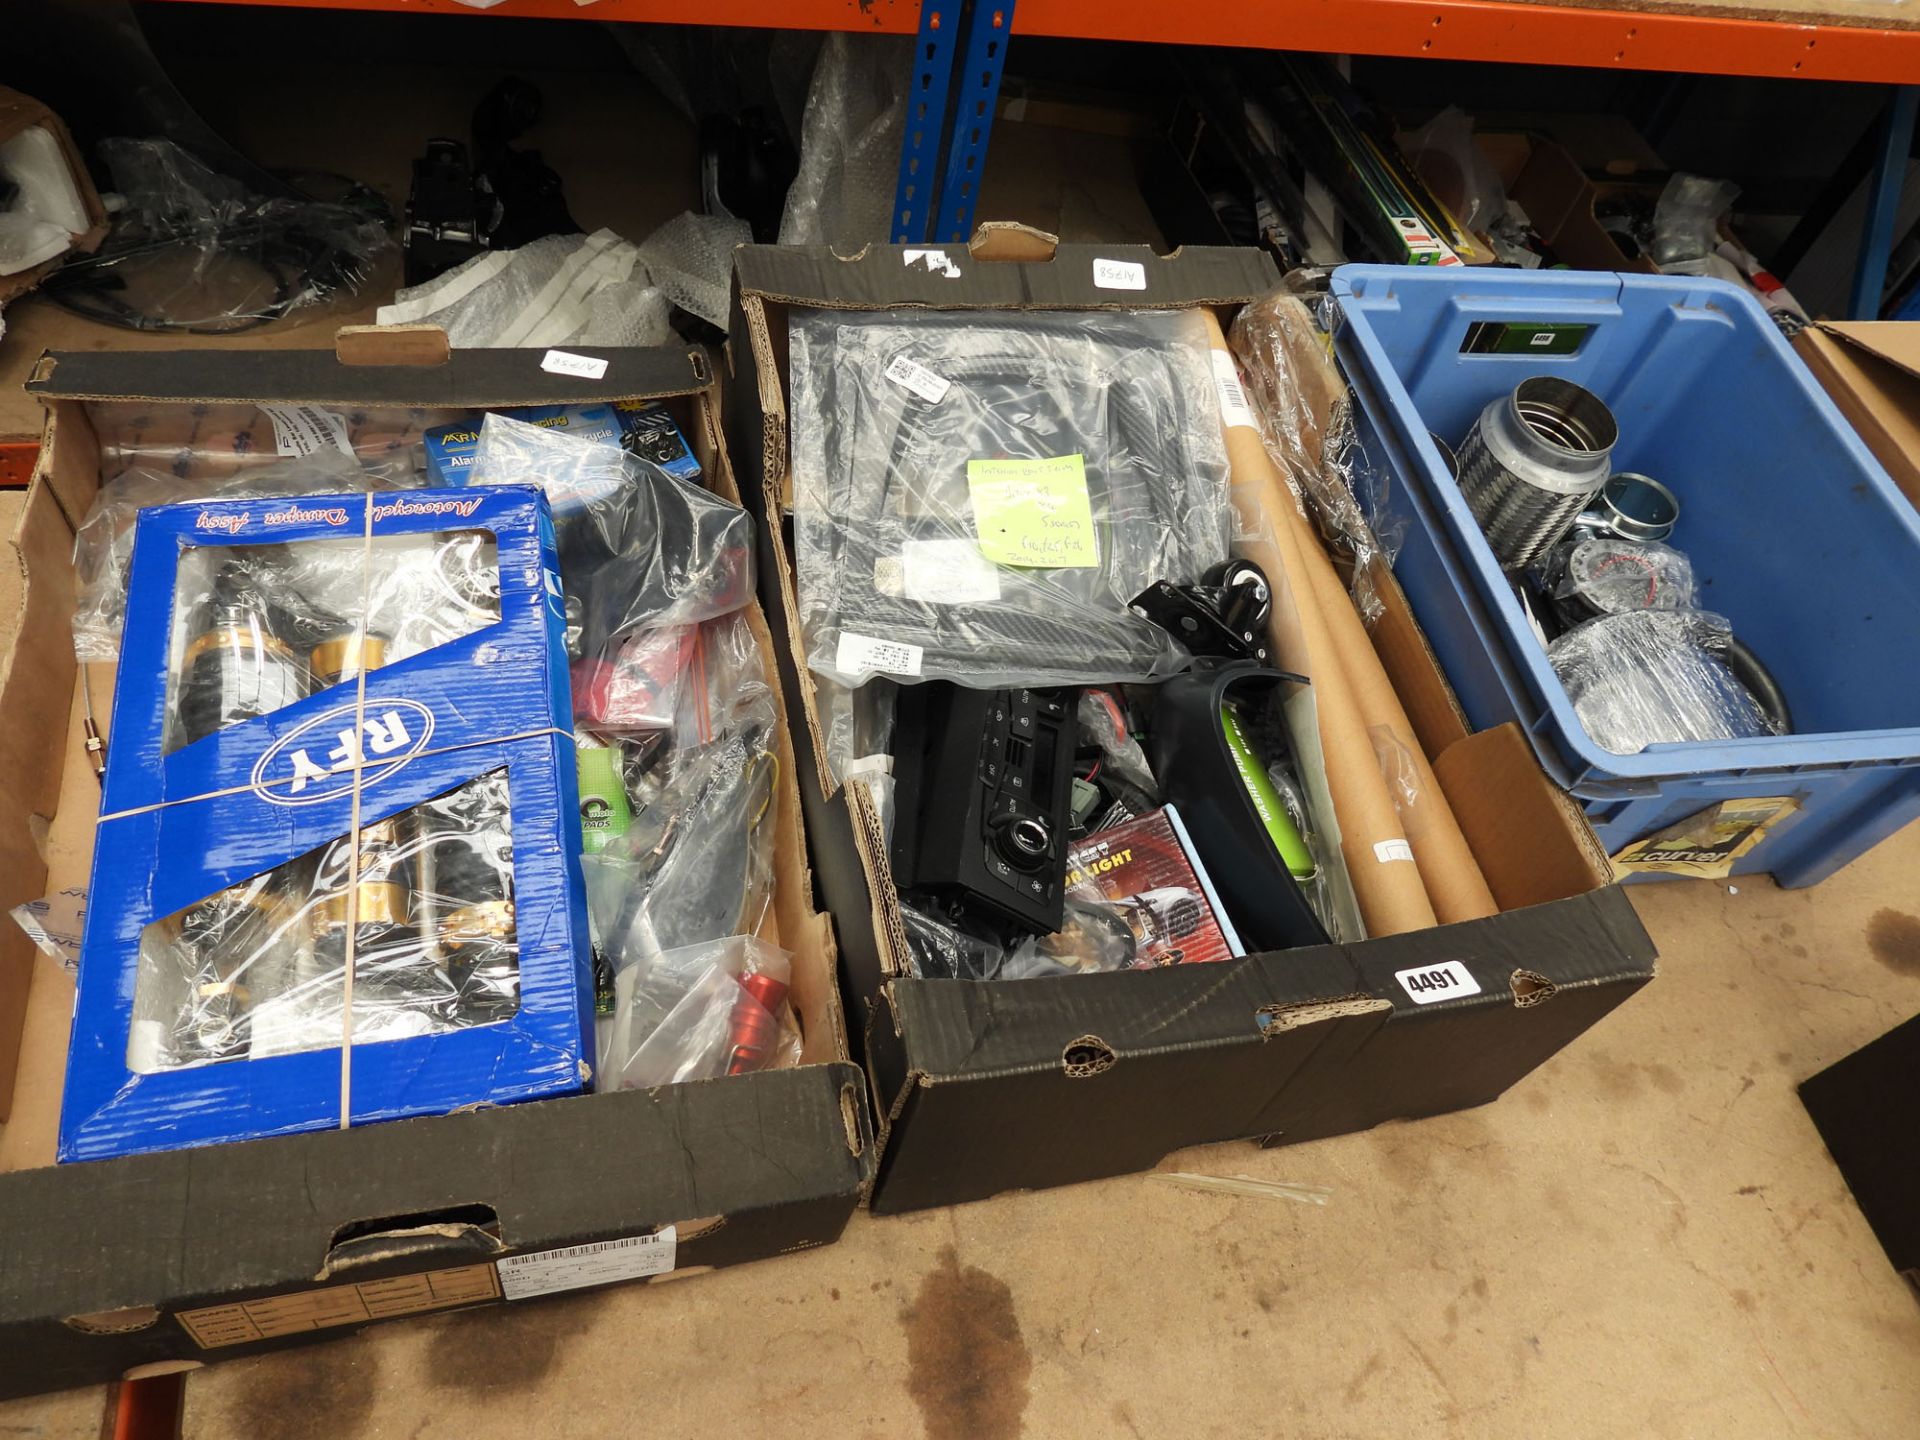 2 cardboard and 1 plastic box containing car parts and accessories